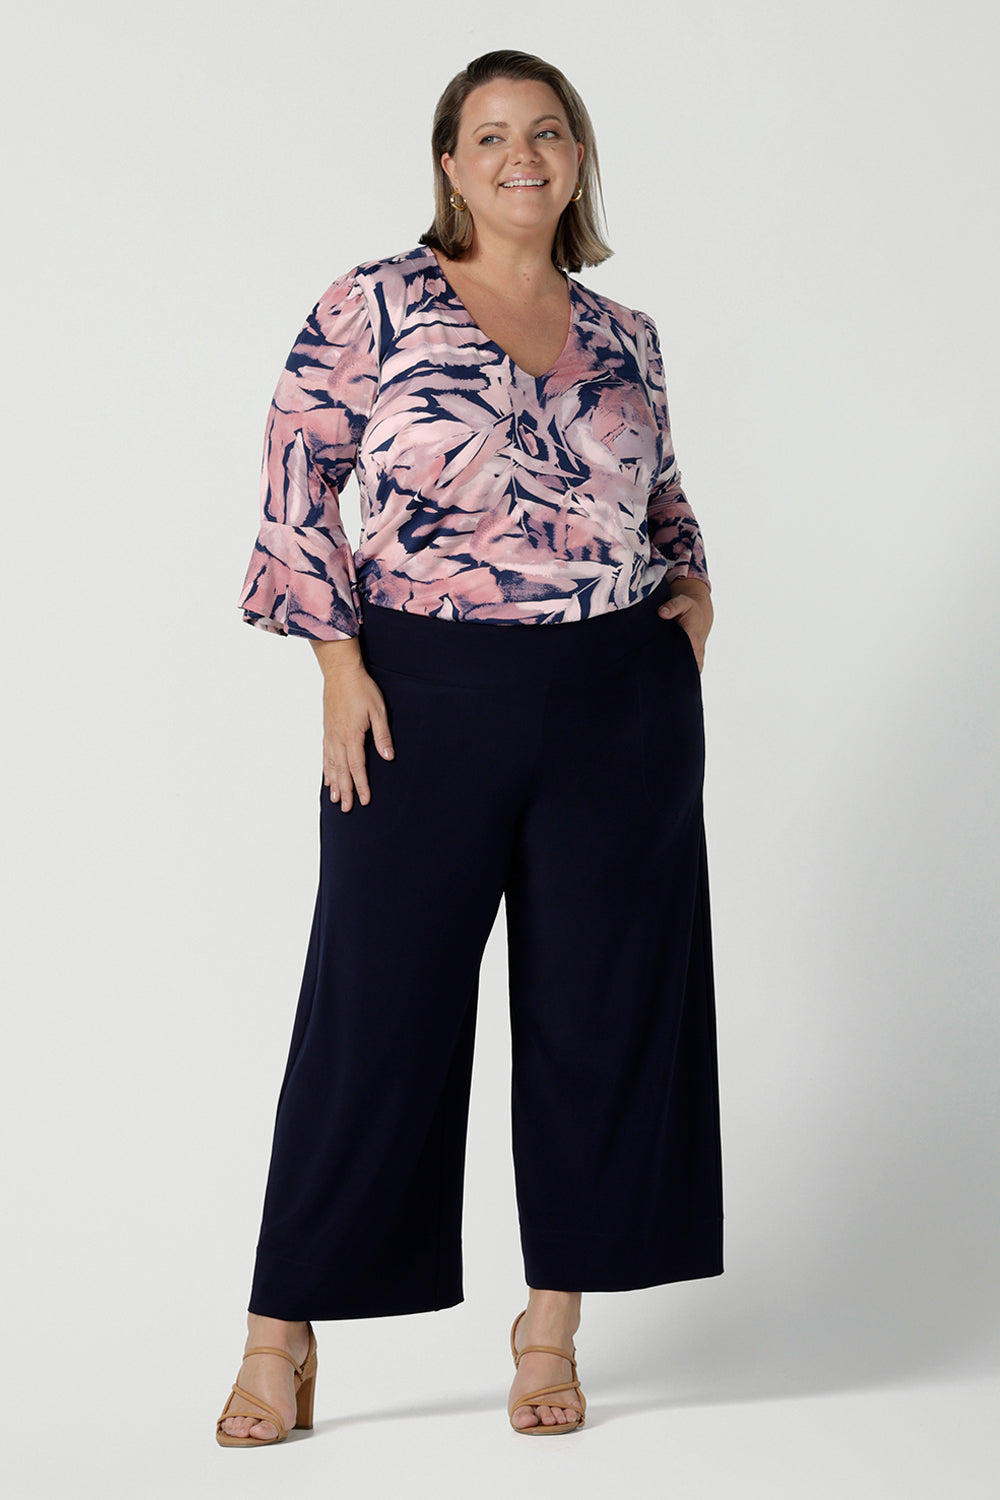 A size 18 woman wears the Tahlia top in Cantata. Fluted sleeves and a v-neckline. A great V-neckline top with 3/4 sleeves. Soft slinky jersey perfect for comfortable workwear for women size 8 - 24.